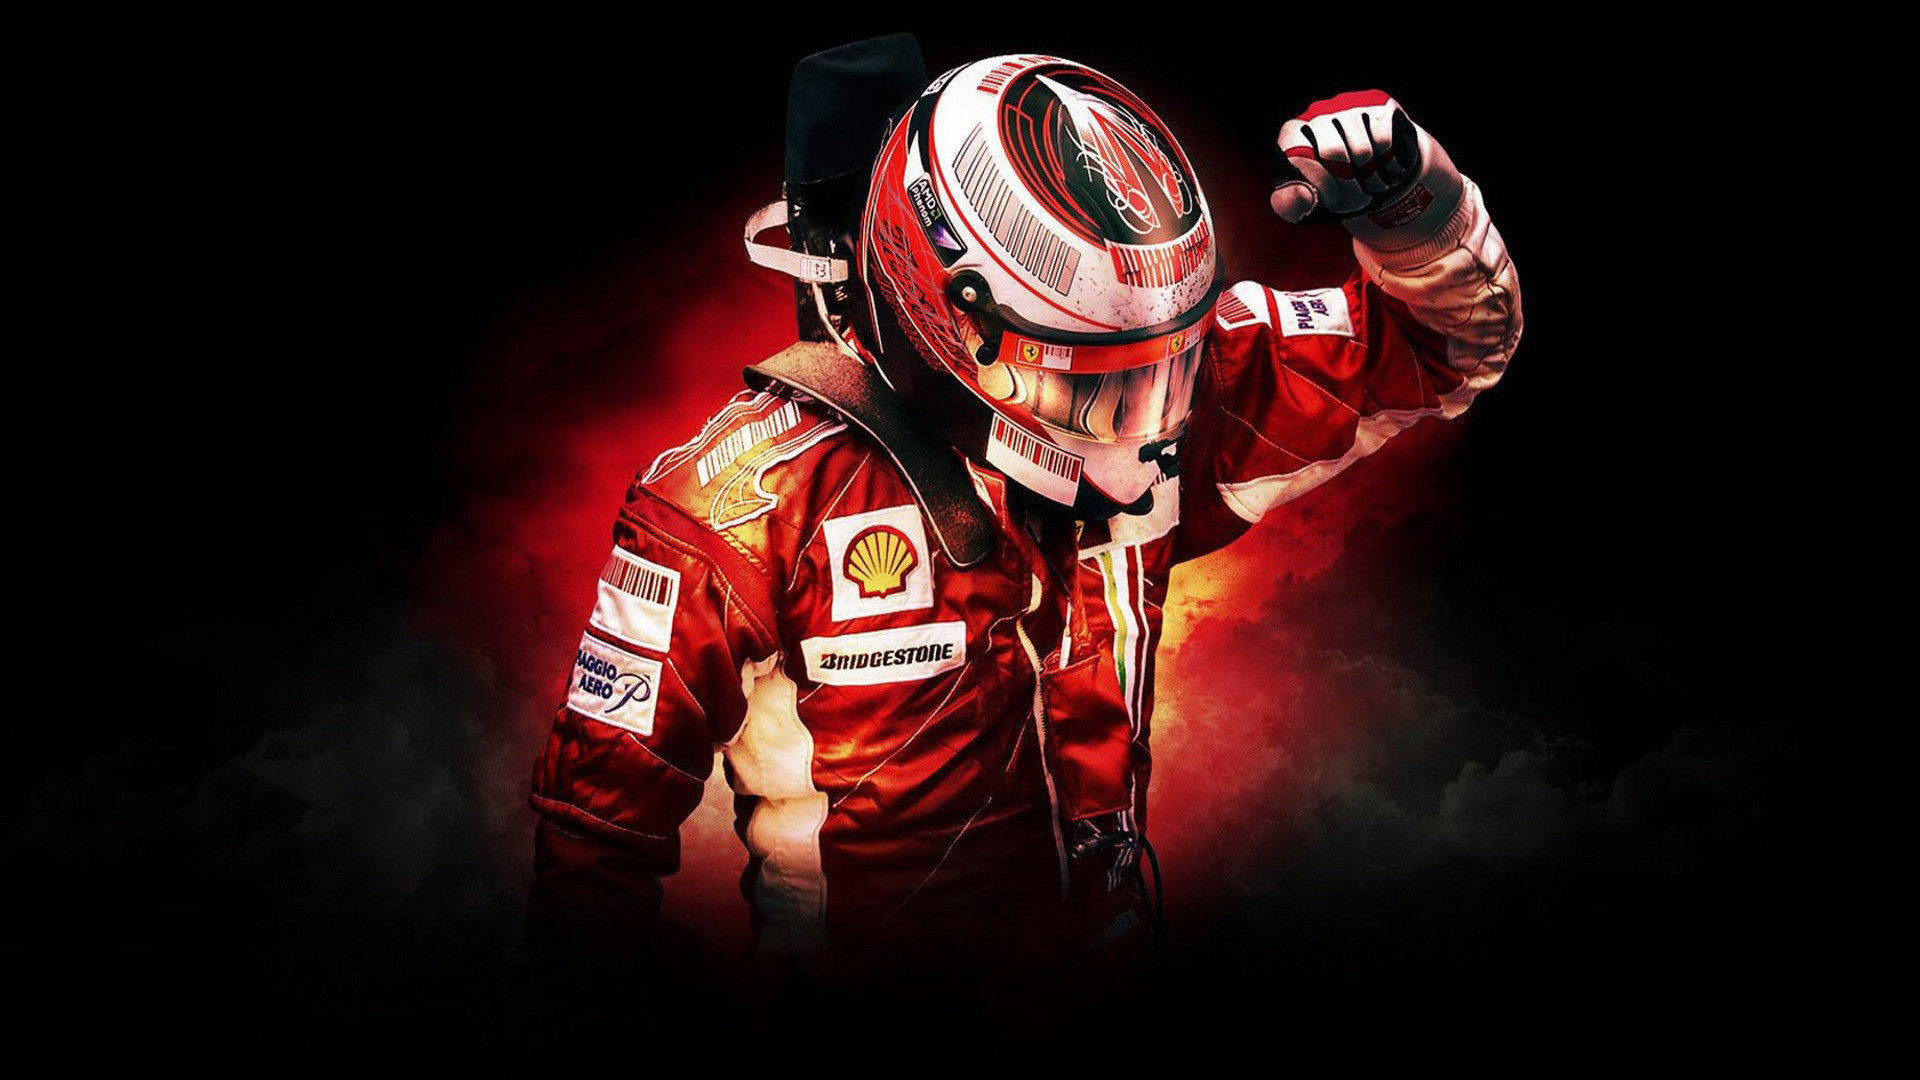 1920x1080 Kimi is back with Ferrari? Immediately thought of my favorite wallpaper.